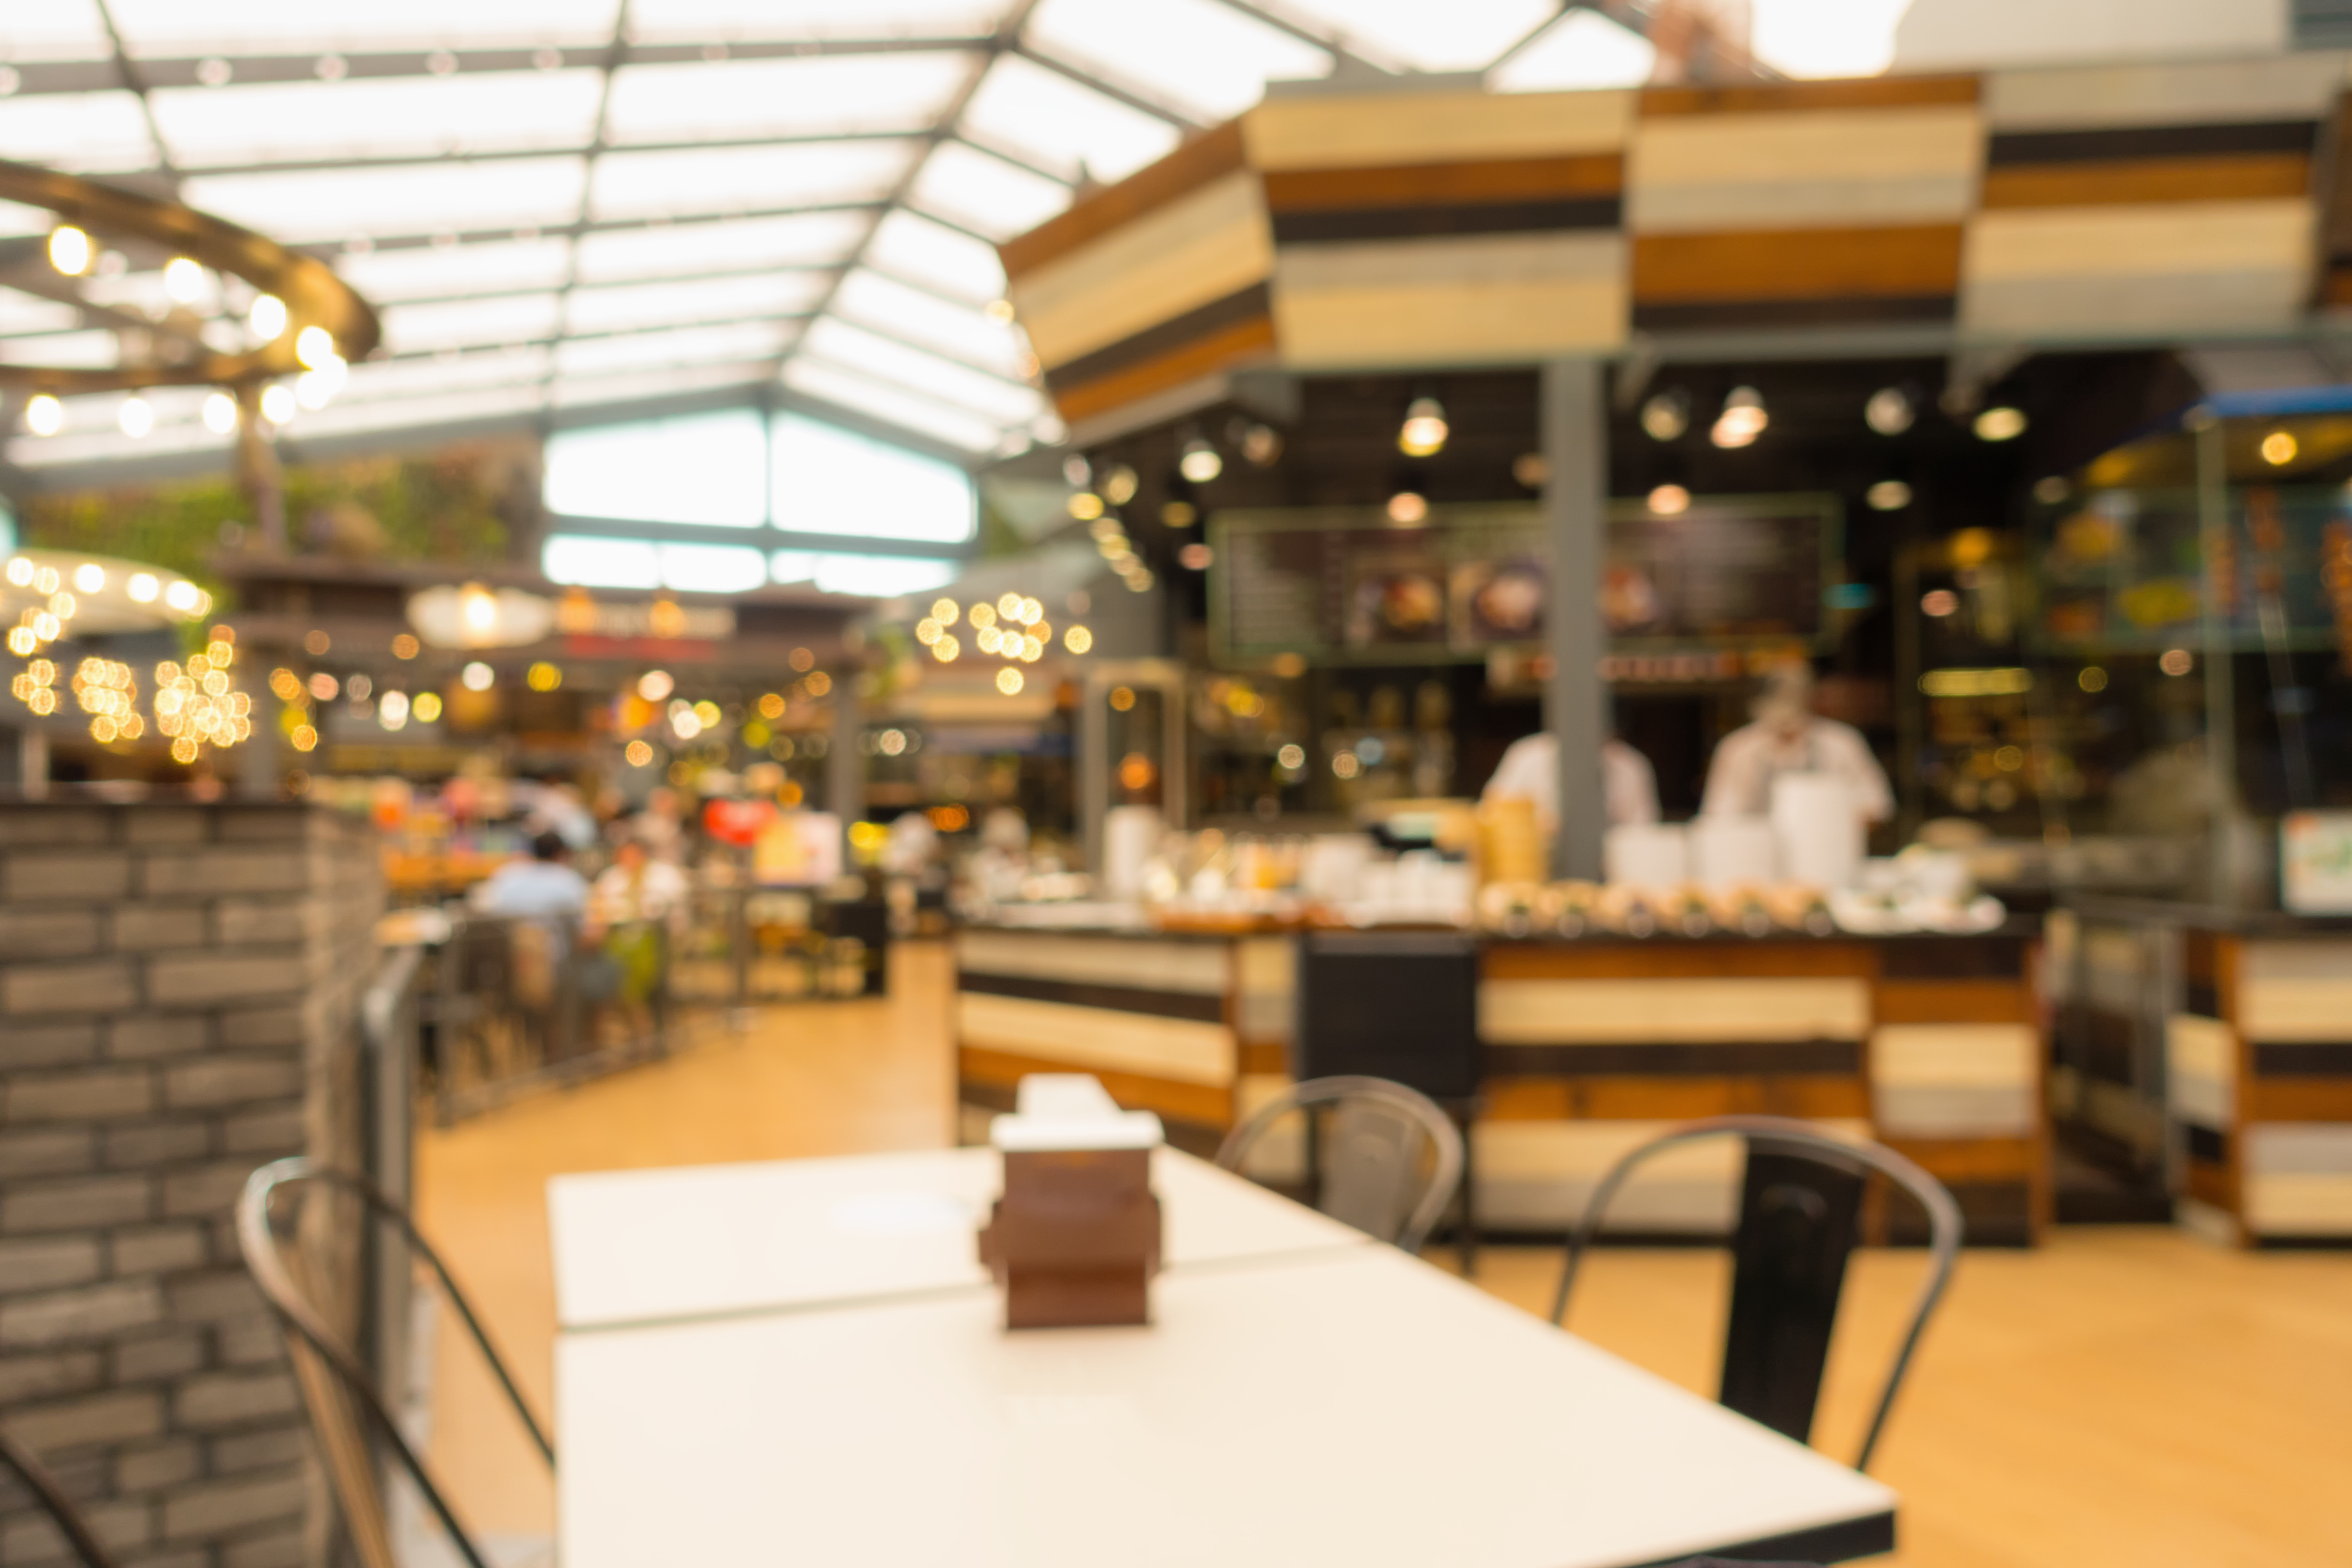 5 Strategies For Dealing With Decreased Restaurant Traffic